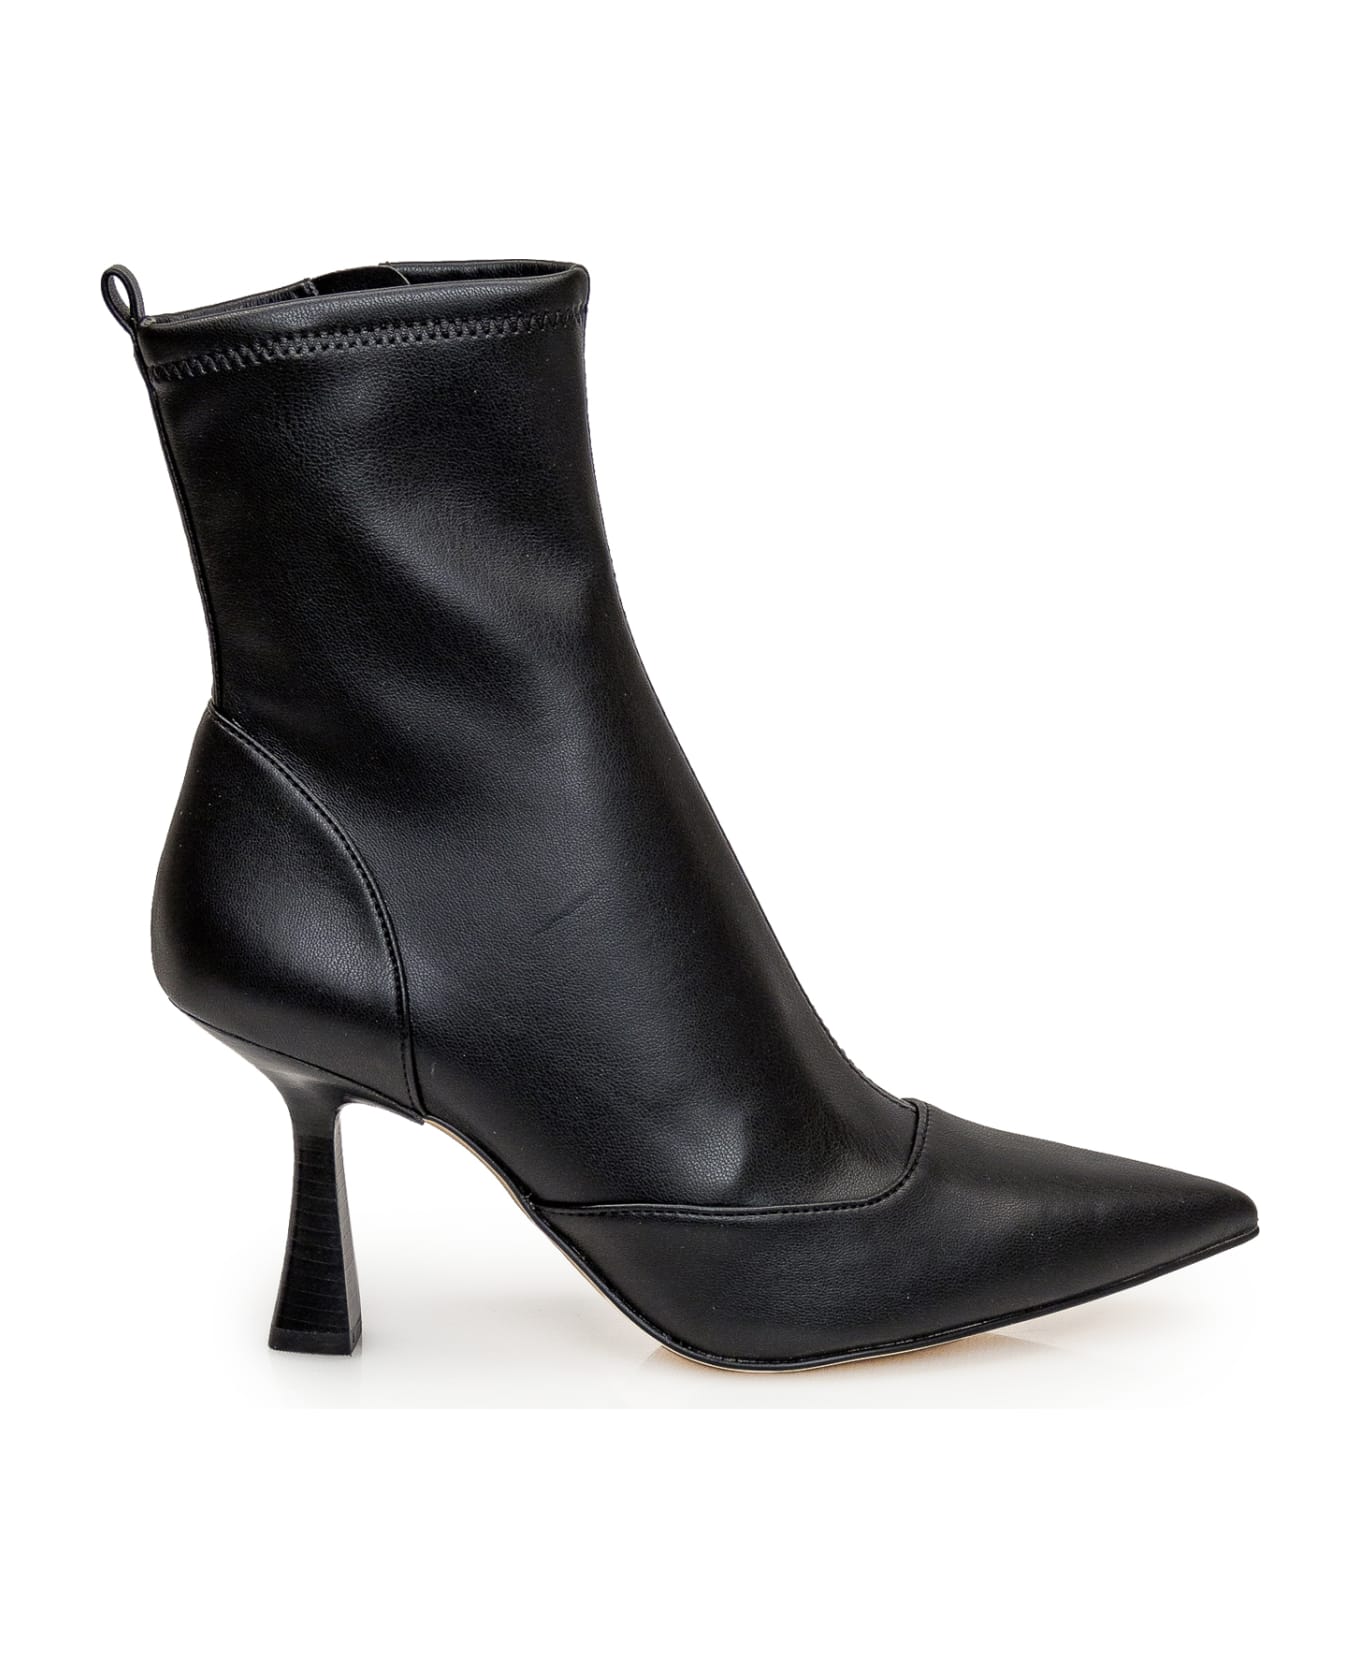 MICHAEL Michael Kors Clara Faux Leather Ankle Boots - black ブーツ